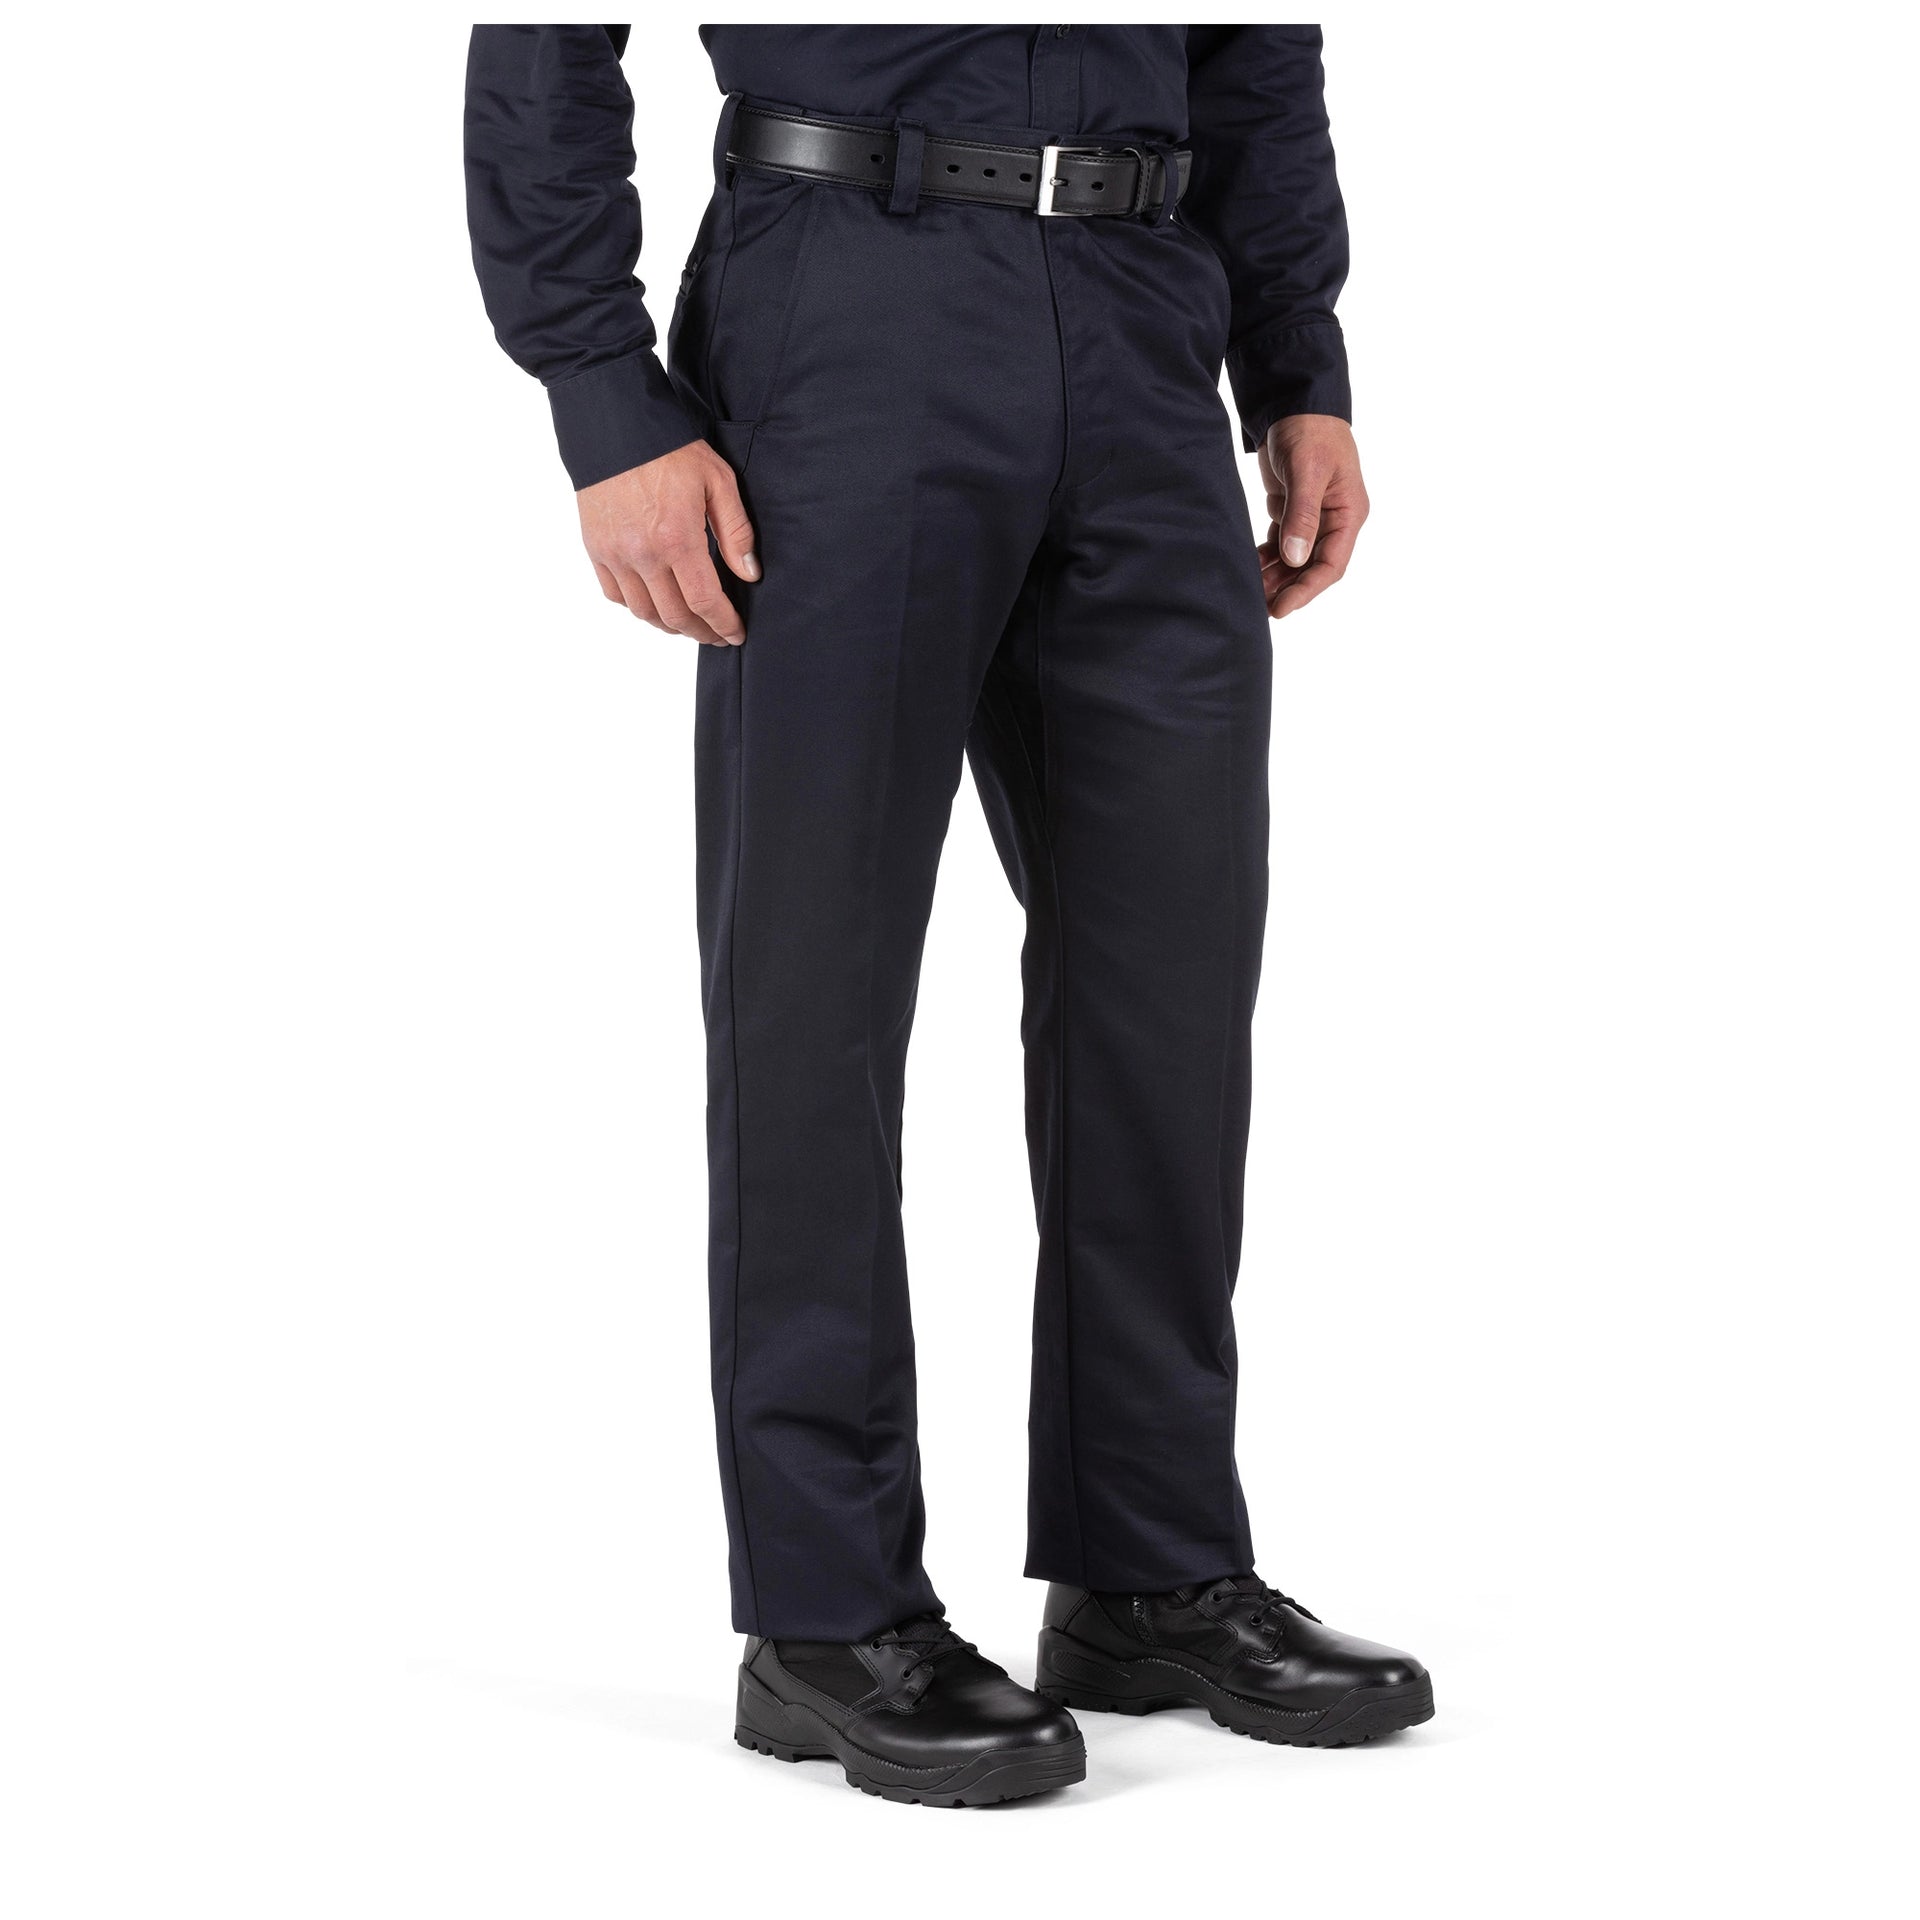 5.11 Tactical Company Pant 2.0 (74508) | The Fire Center | Fuego Fire Center | Firefighter Gear | Under pressure, close to the heat, the Company Pant 2.0 helps you stay focused and ready. Designed with proven, station-ready features, this pant is certified to NFPA 1975 (2019 edition). It’s constructed with a TOUGH COTTON™ finished twill and stitched with heat-resistant Firefly™ thread from top to bottom 